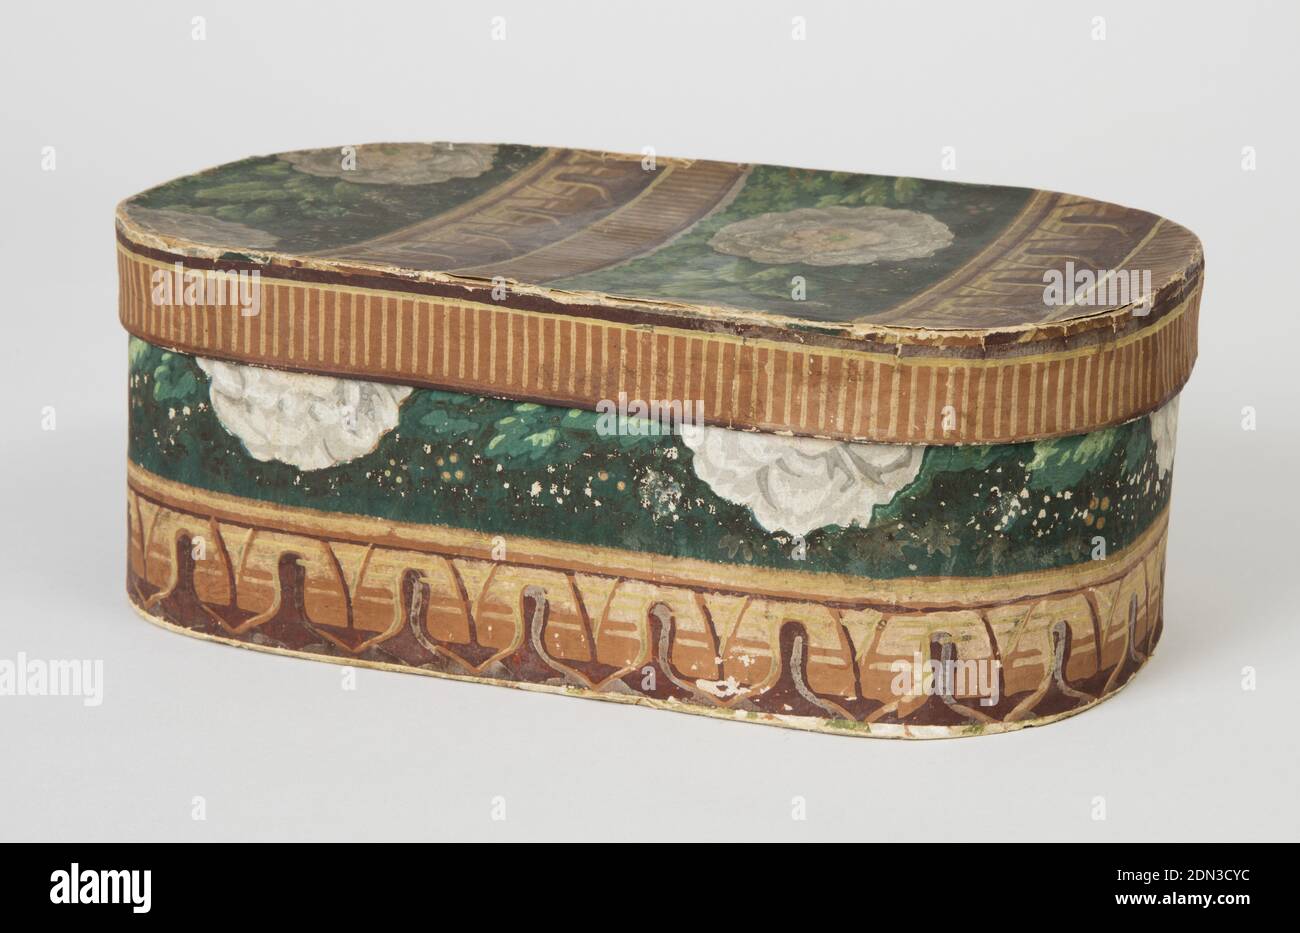 Bandbox, John Perkins, Block-printed paper, pasteboard support, Small pasteboard bandbox covered with wallpaper border pattern, pieced so one horizontal border band encircles bottom and a narrow edging strip covers rim of lid. Stylized architectural leaf band in browns and yellows, and band of stripings. Principal banding: on dark green background, green leaves and white camellias with pink and yellow centers, in continuous band. Strip of unfaded color under lid. Remnants of a different floral sidewall paper with a yellow ground around edge on box bottom., New Bedford, Massachusetts, USA Stock Photo